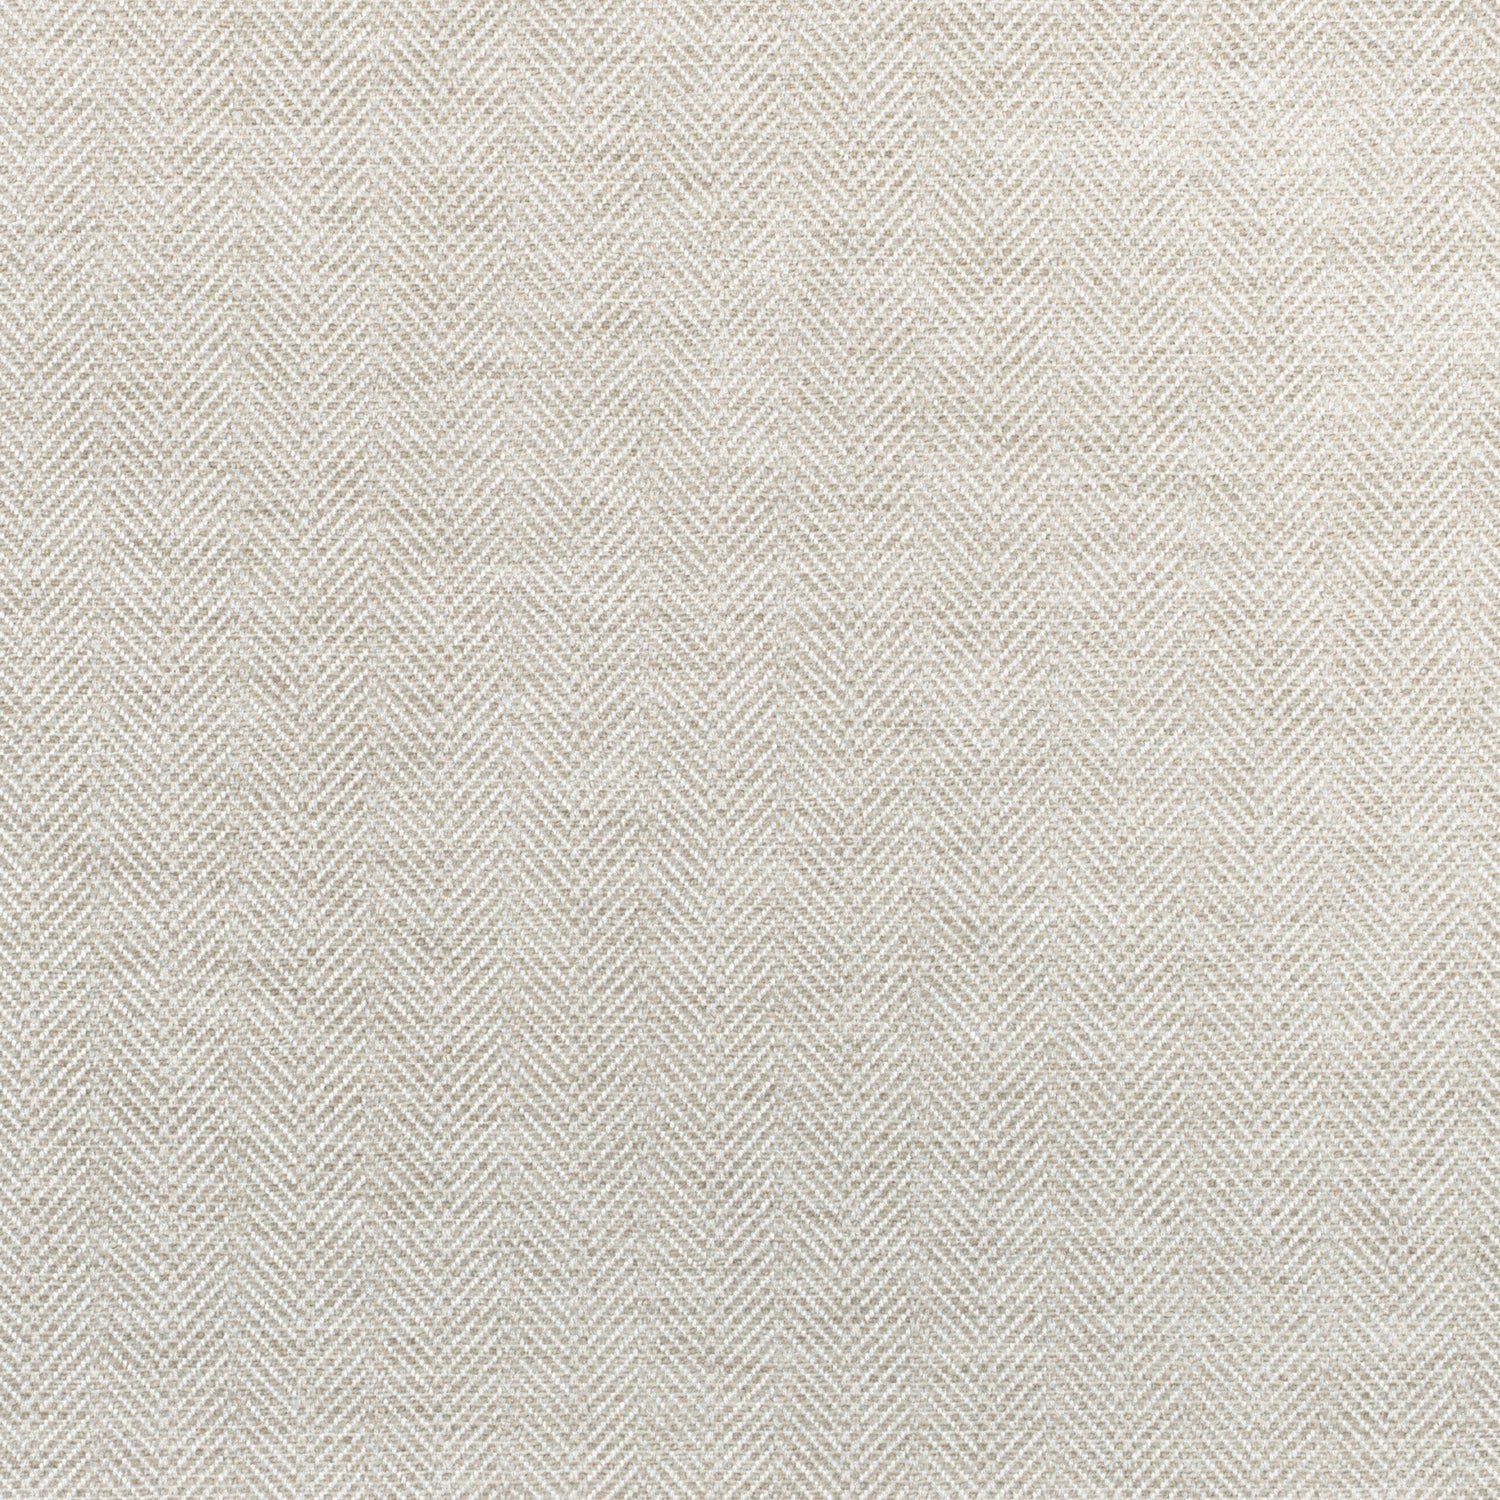 Hadrian Herringbone fabric in flax color - pattern number W80710 - by Thibaut in the Woven Resource 11: Rialto collection